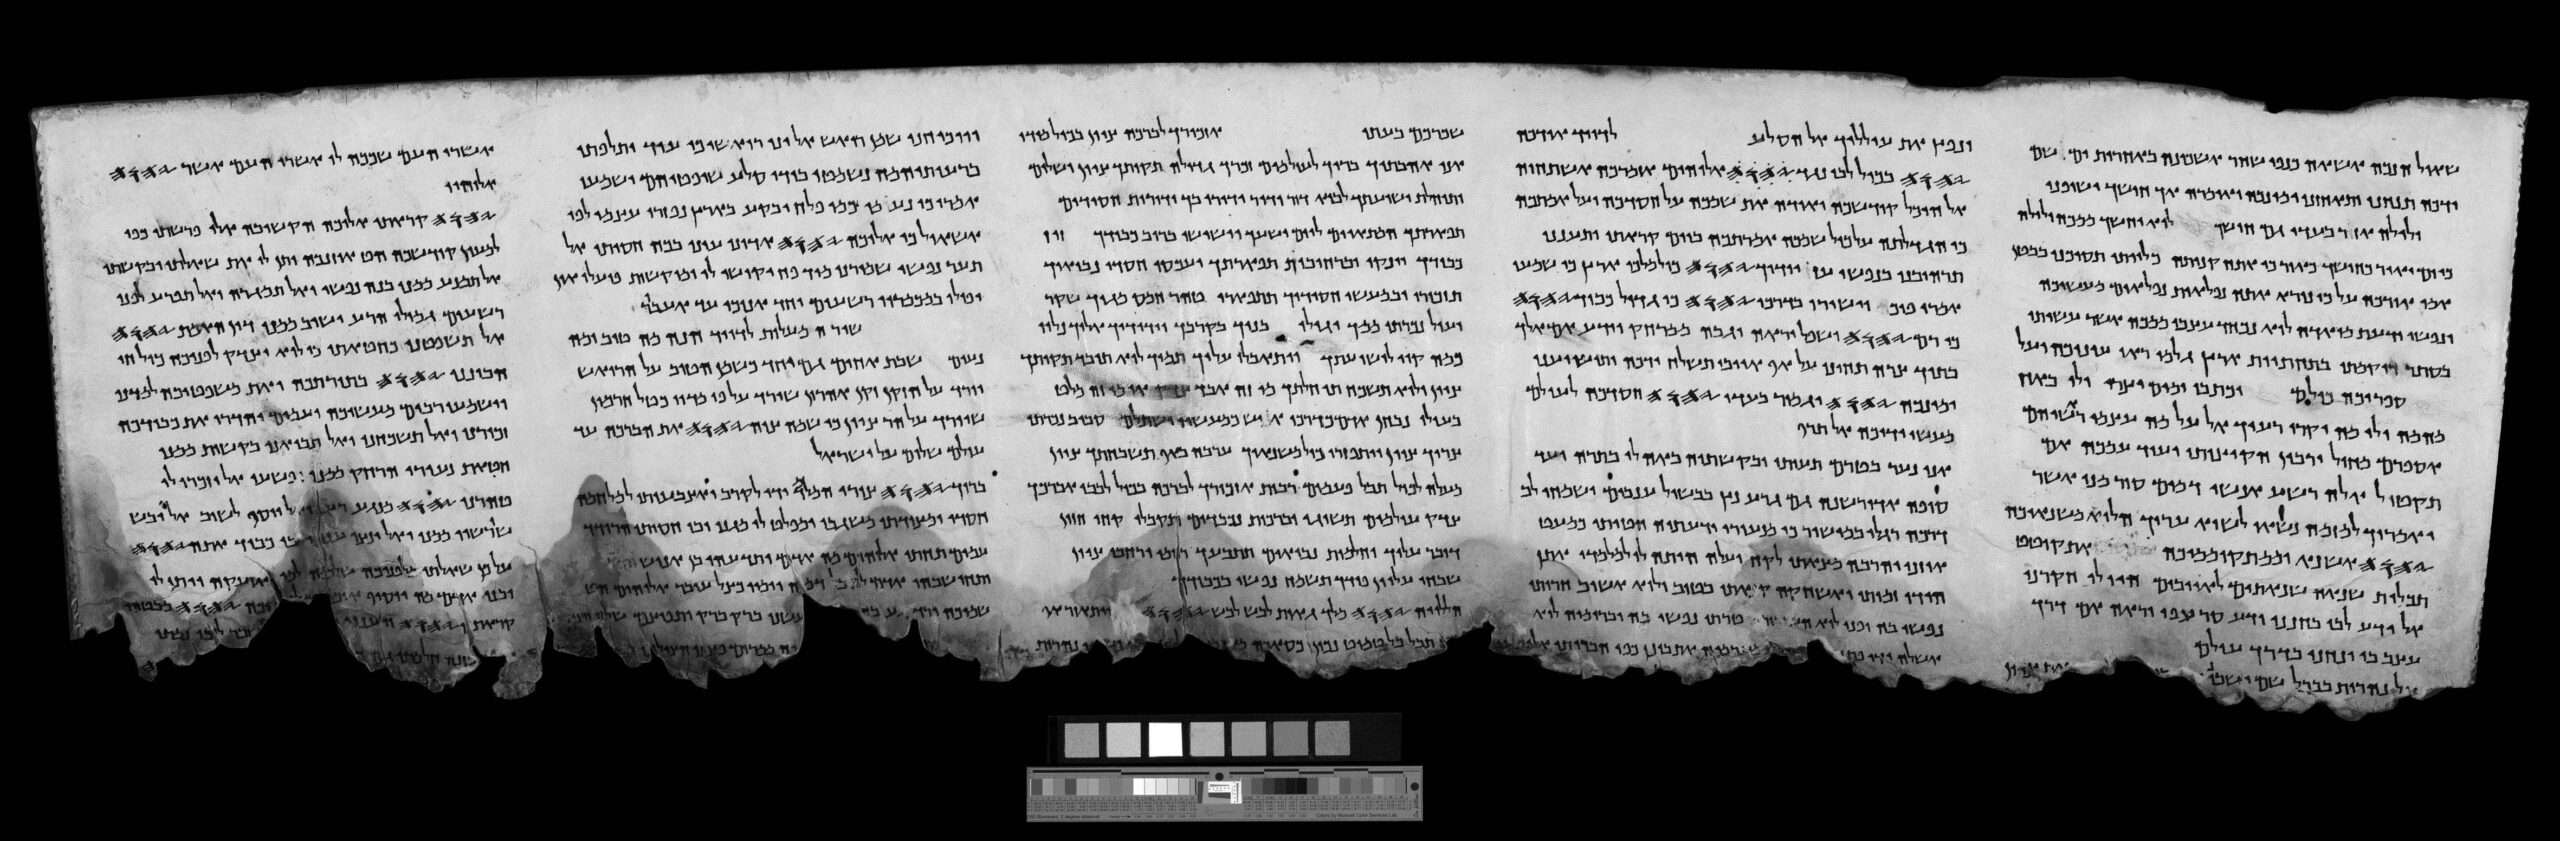 Spectral image of Psalms scroll, revealing some of the letters for the first time. (Photo: Yair Medina and Shai Halevi, courtesy of the IAA)